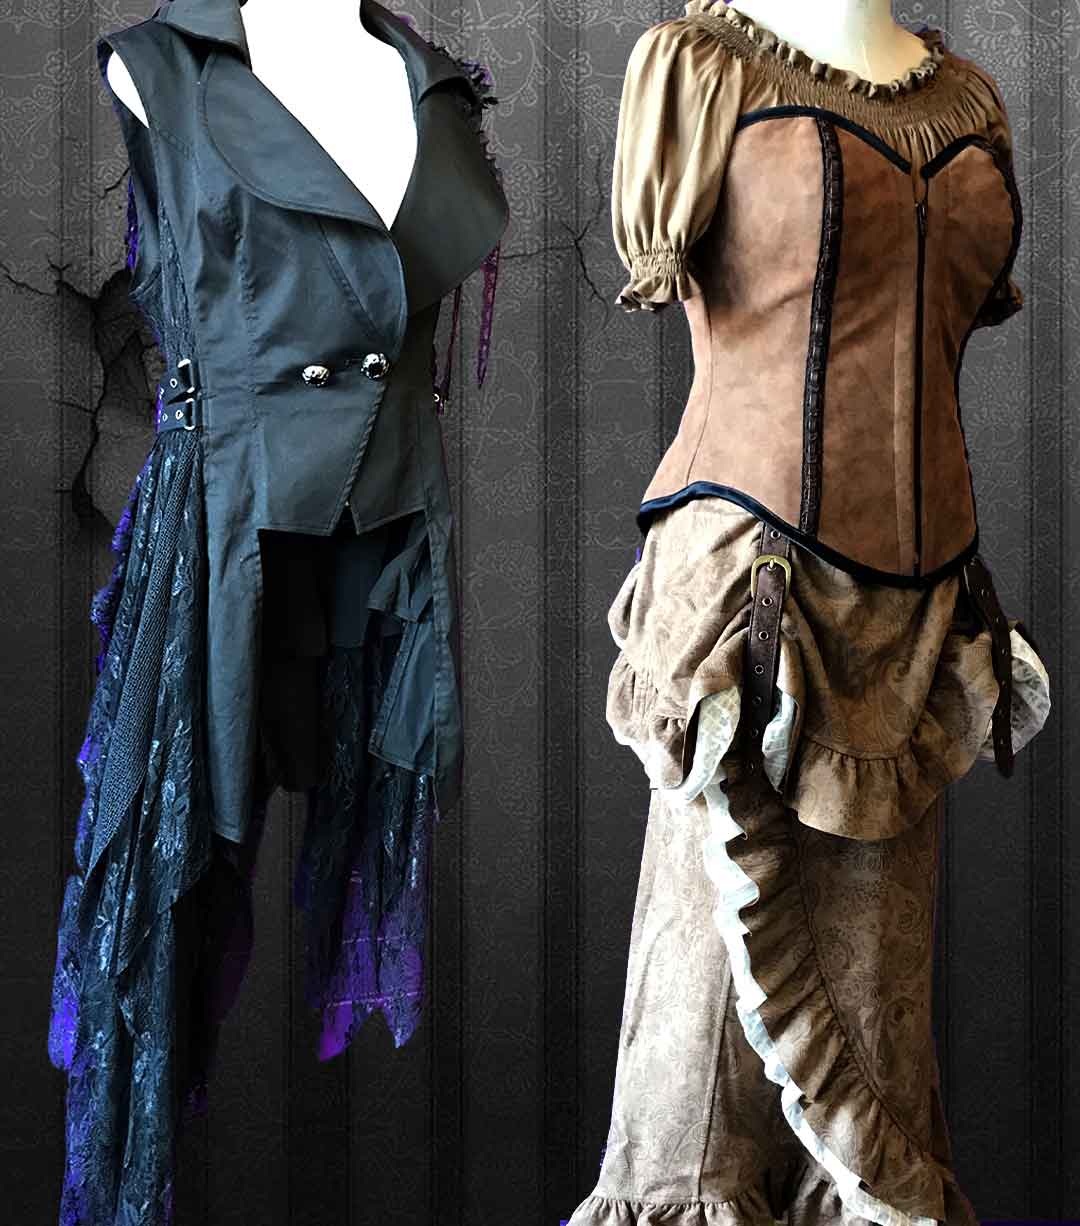 A black punk rave vest with lace features and brown steampunk skirt with ruffles